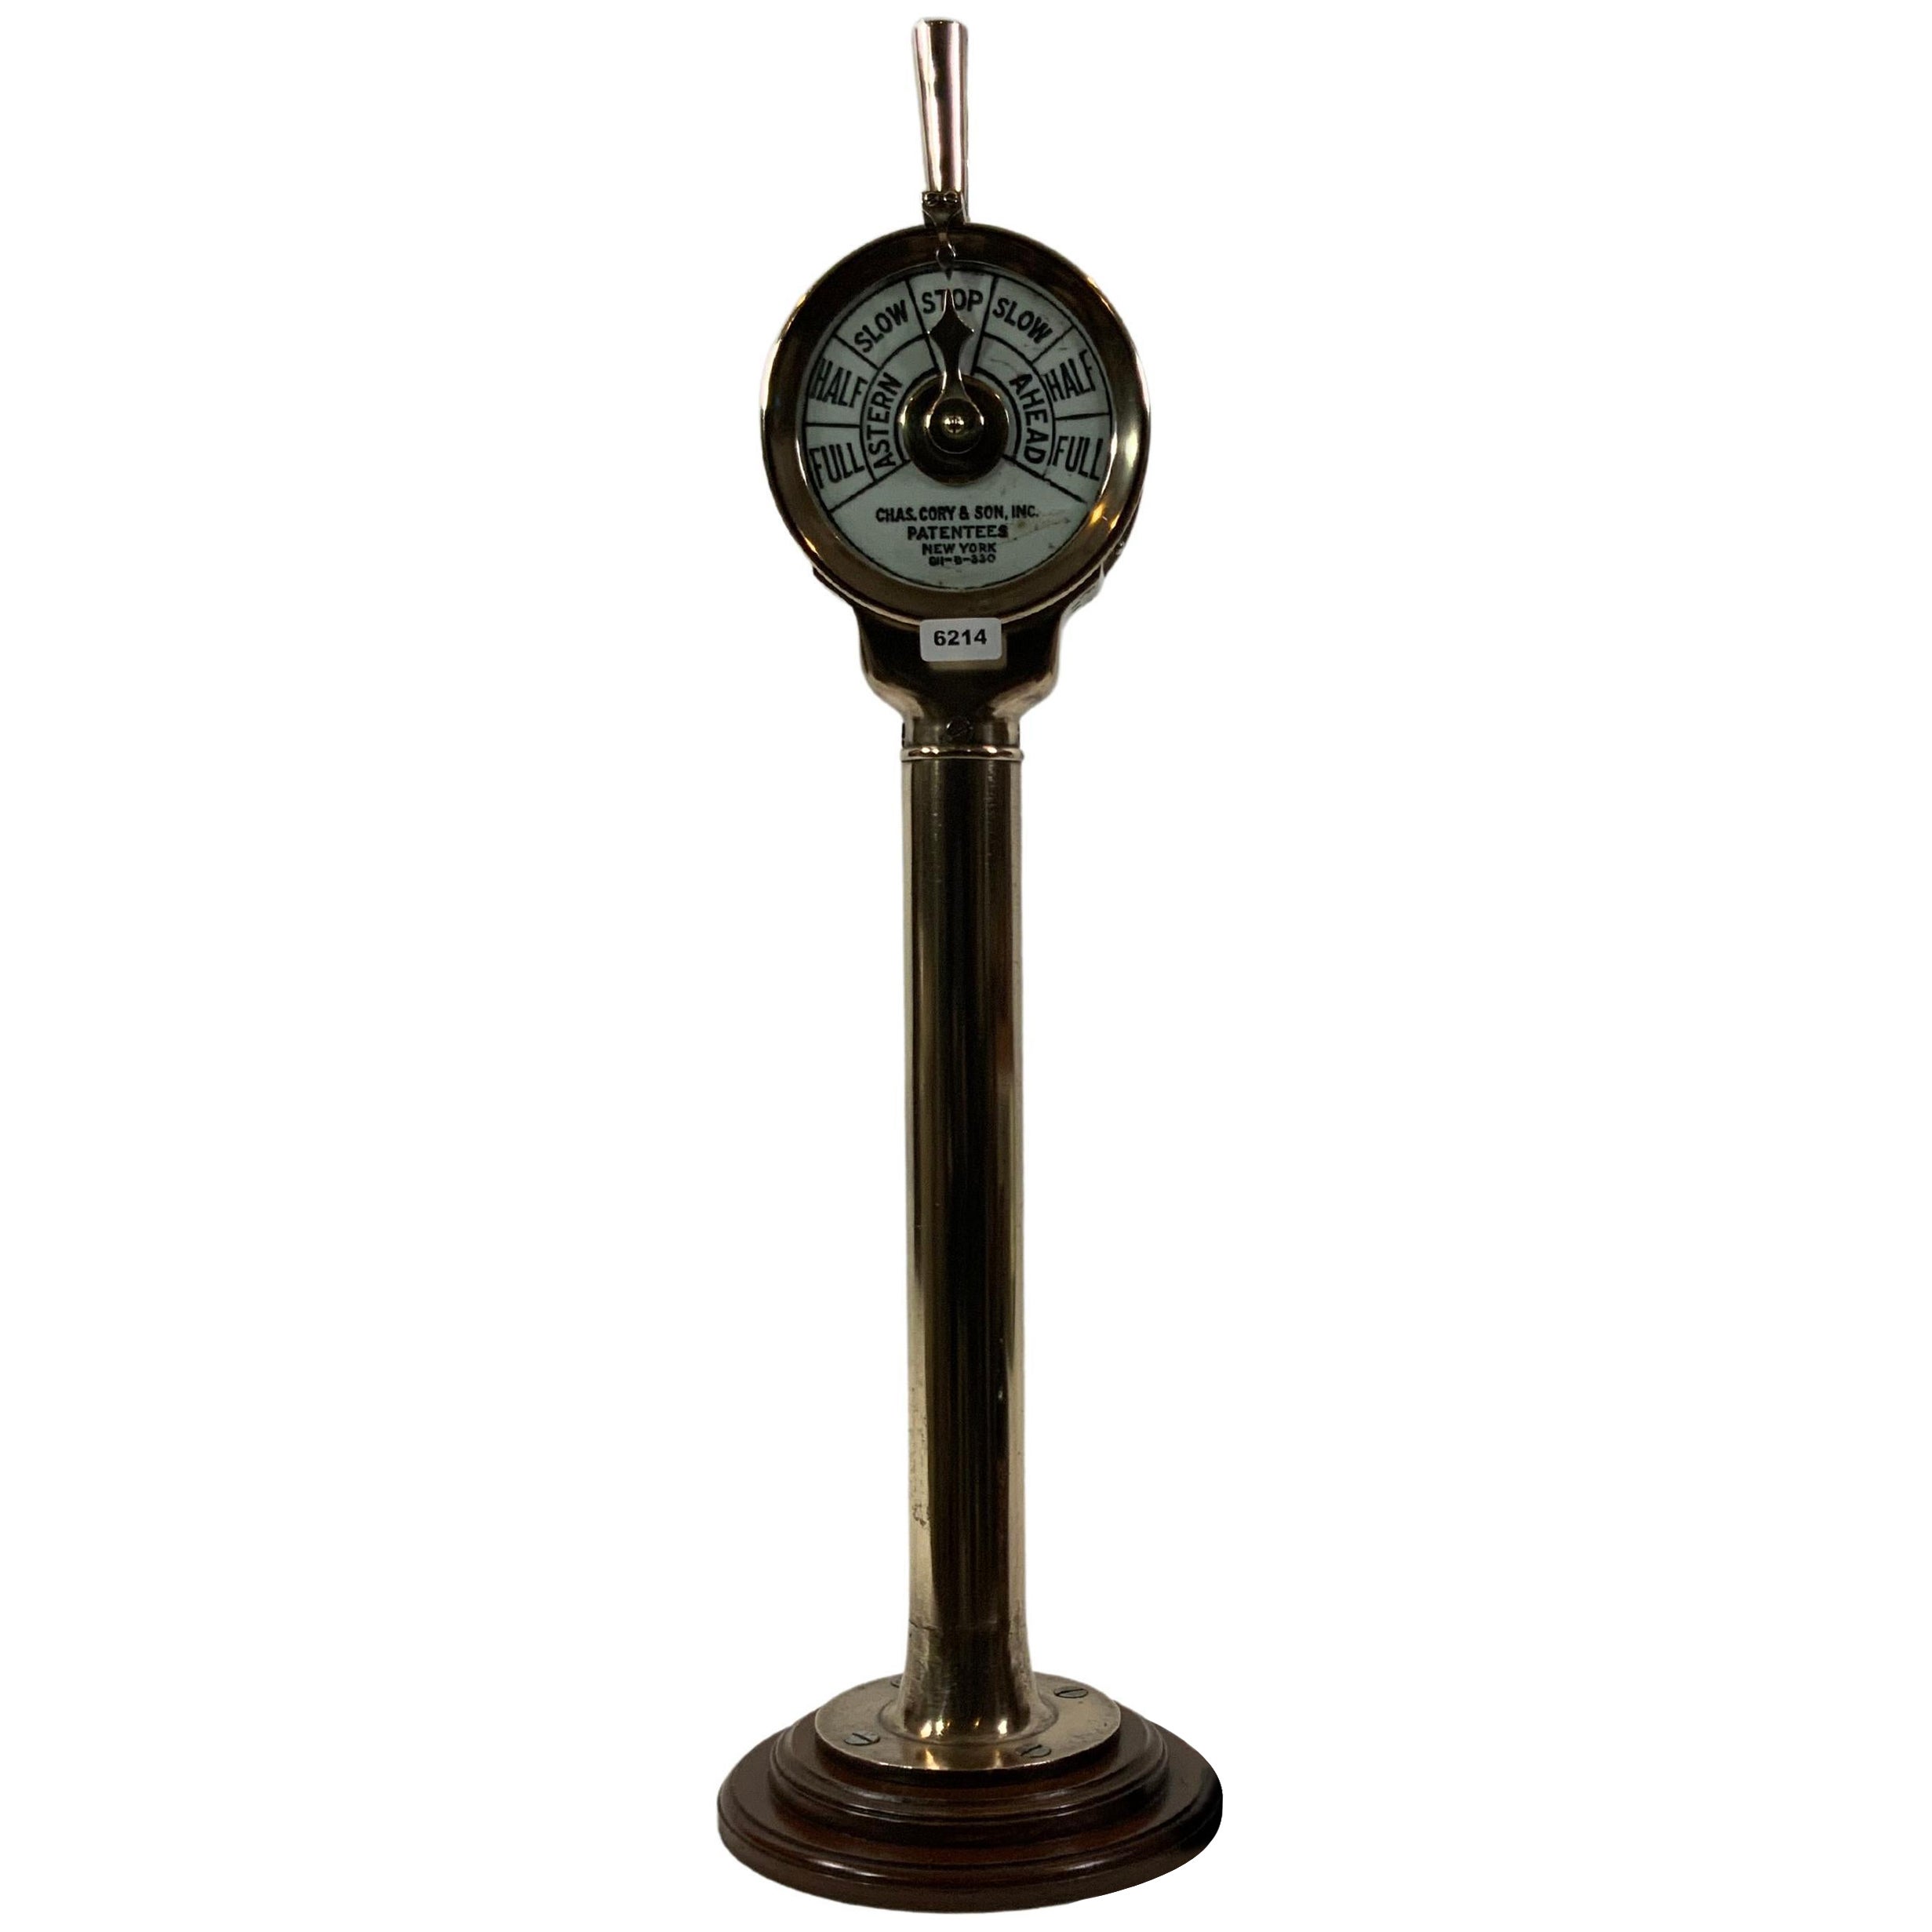 Ship's Engine Order Telegraph by Charles Cory and Son of New York